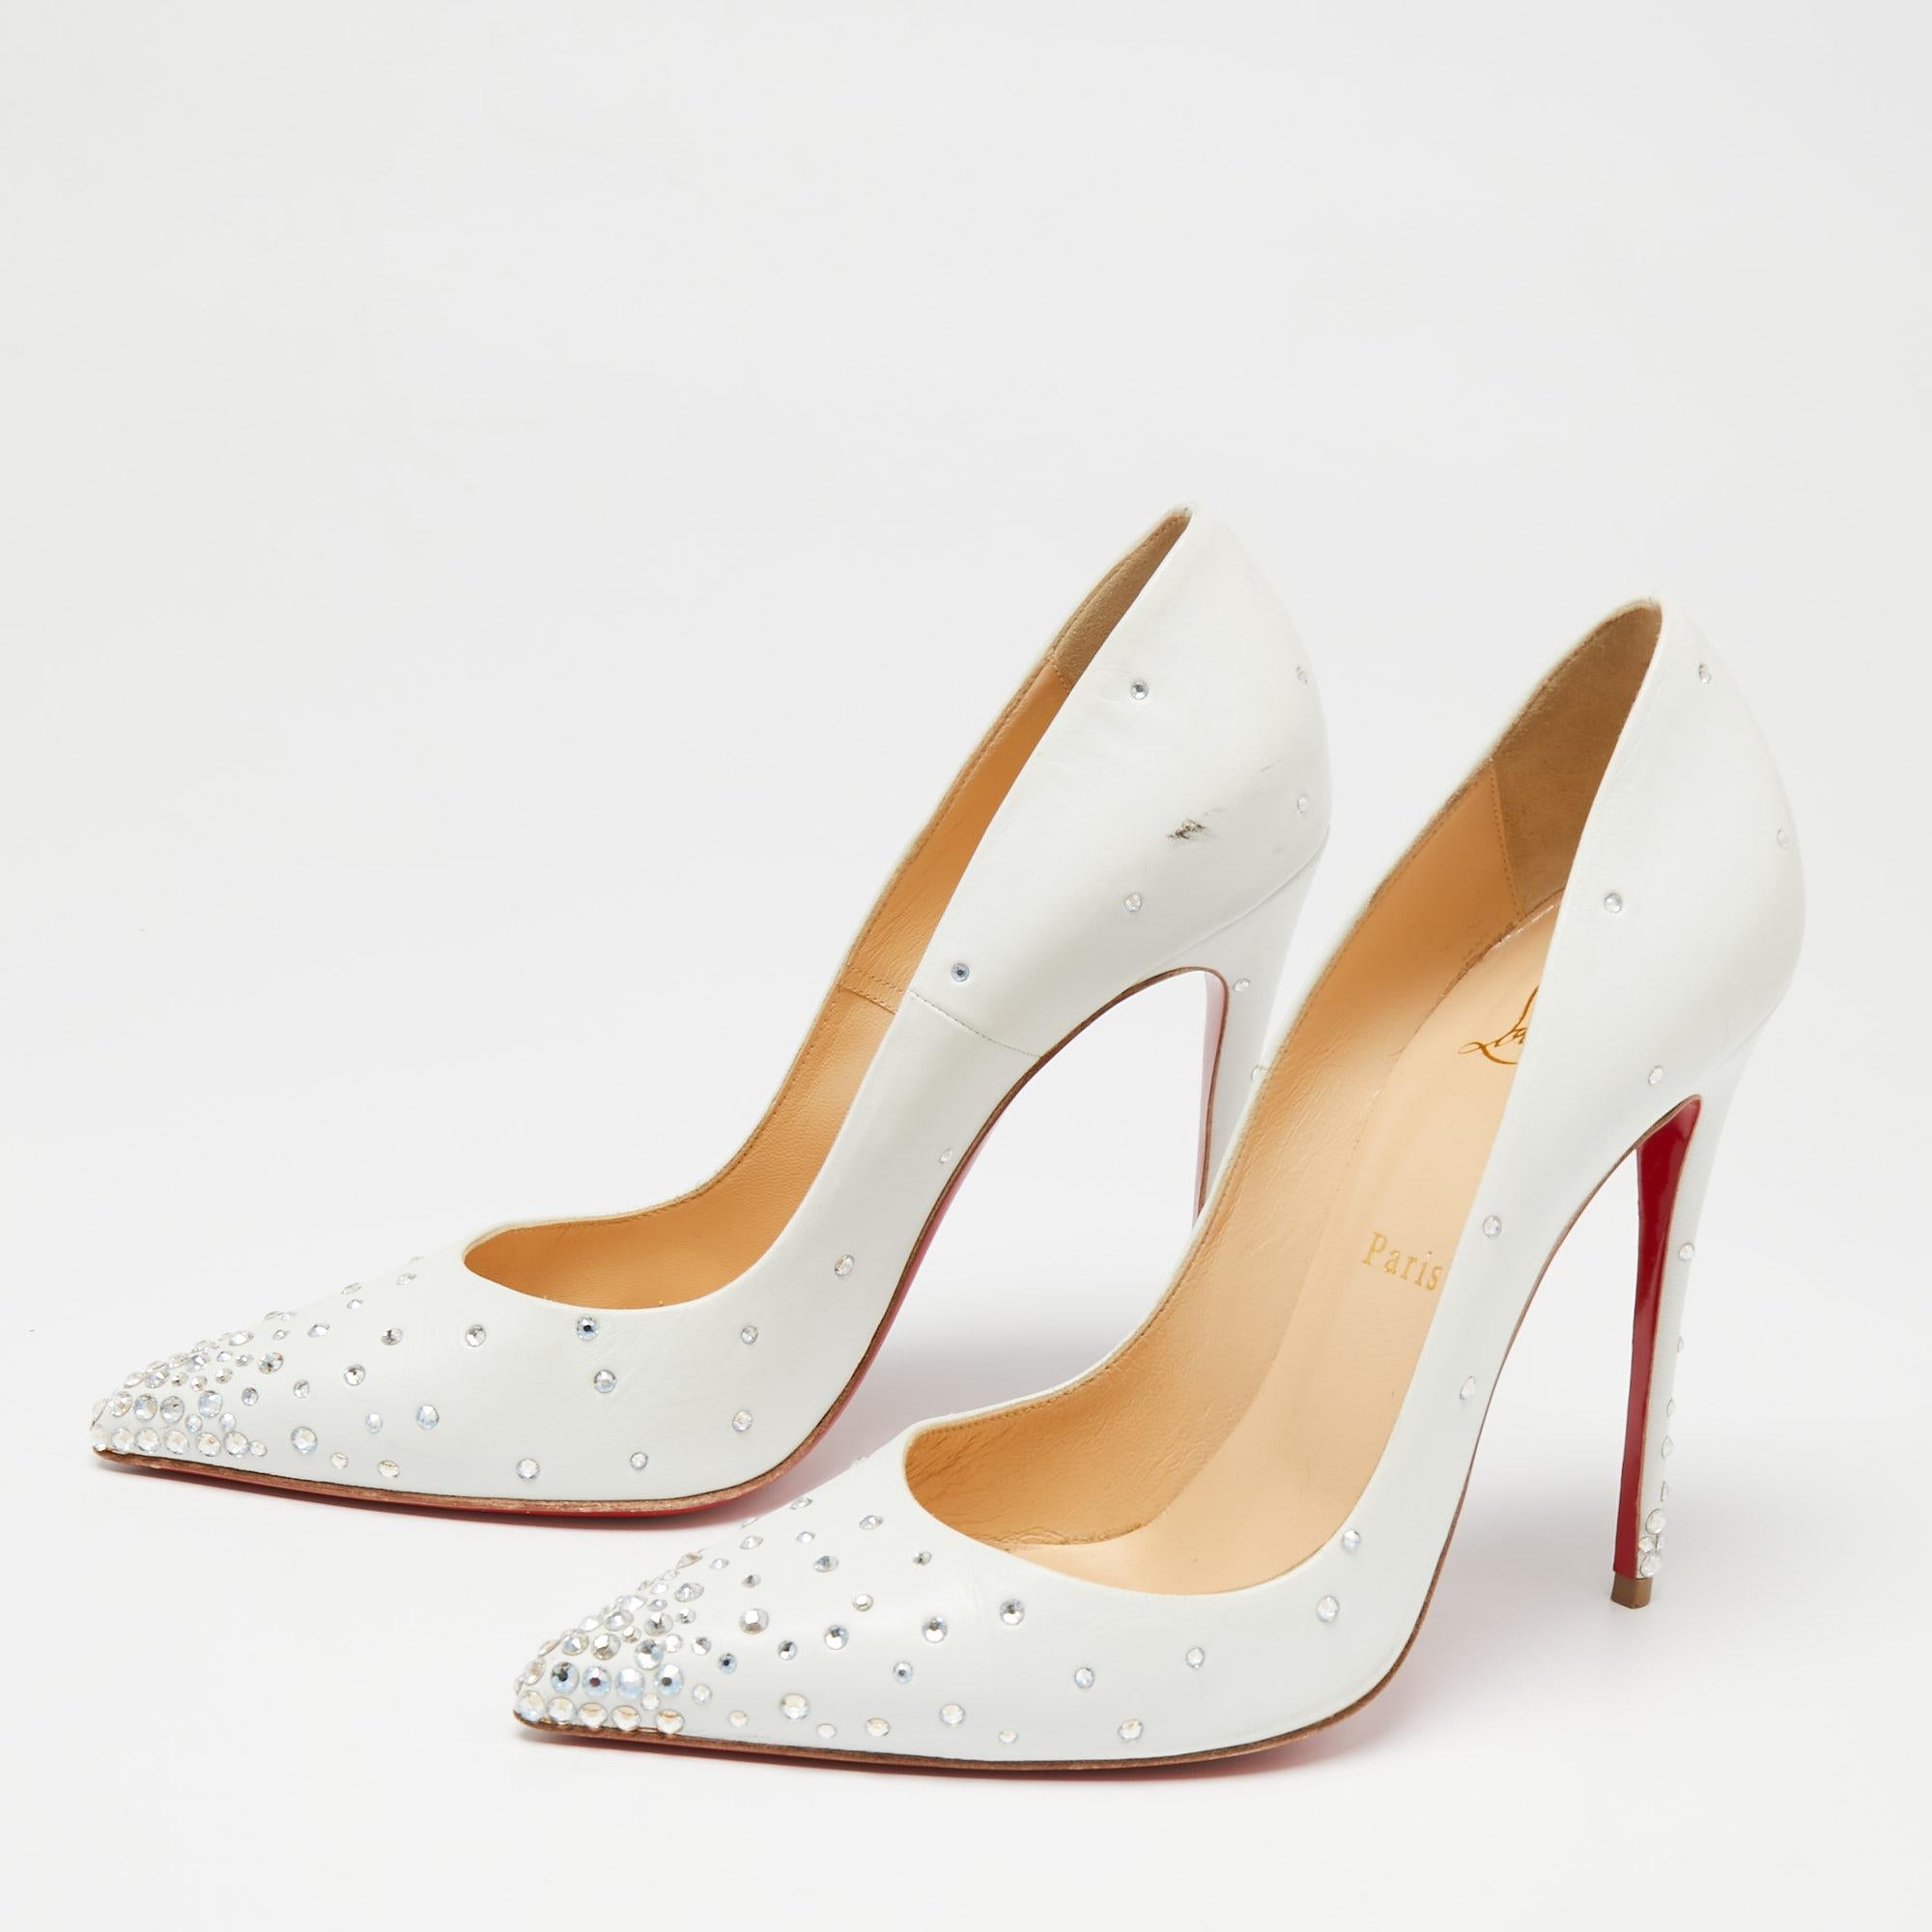 The So Kate pumps from Christian Louboutin are named after supermodel Kate Moss. They are designed with selective features that exhibit the brand's signature skill and legacy effortlessly. Covered in white leather and cut into a daring silhouette,